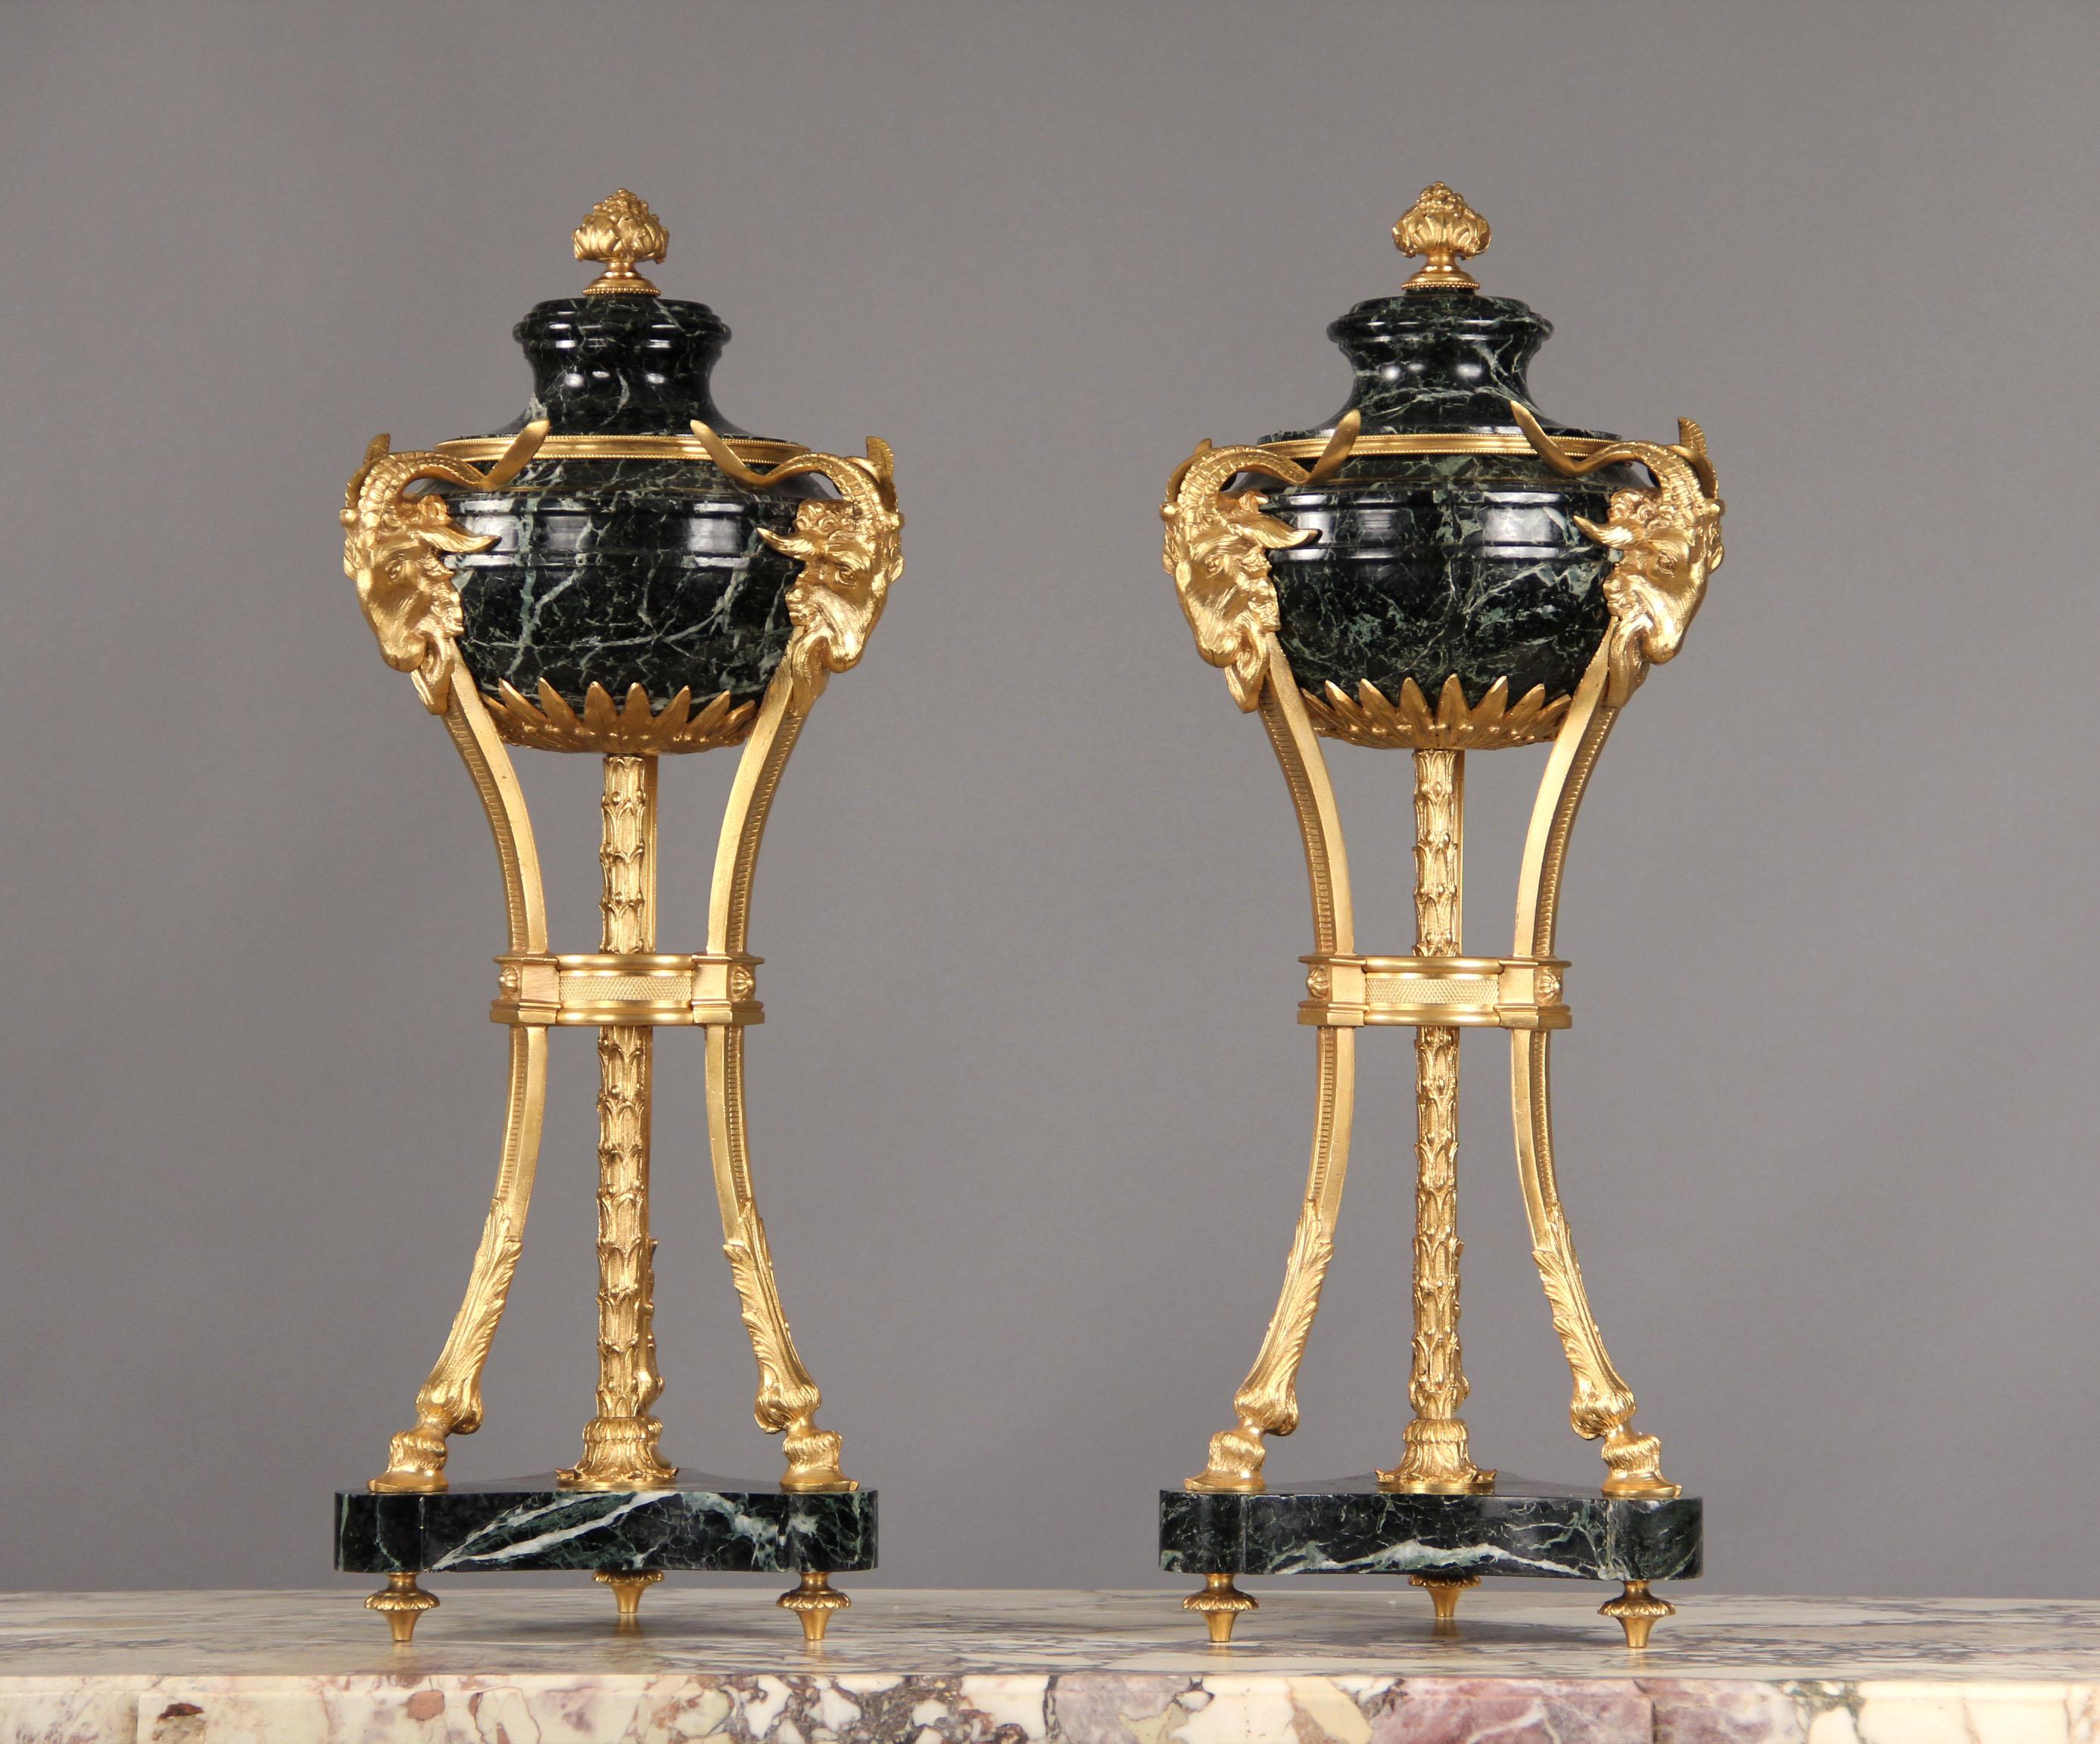 A pair of late 19th century gilt bronze-mounted Verde Antico marble Cassolettes

Each with a removable lid, marble body surmounted with three bronze ram heads.